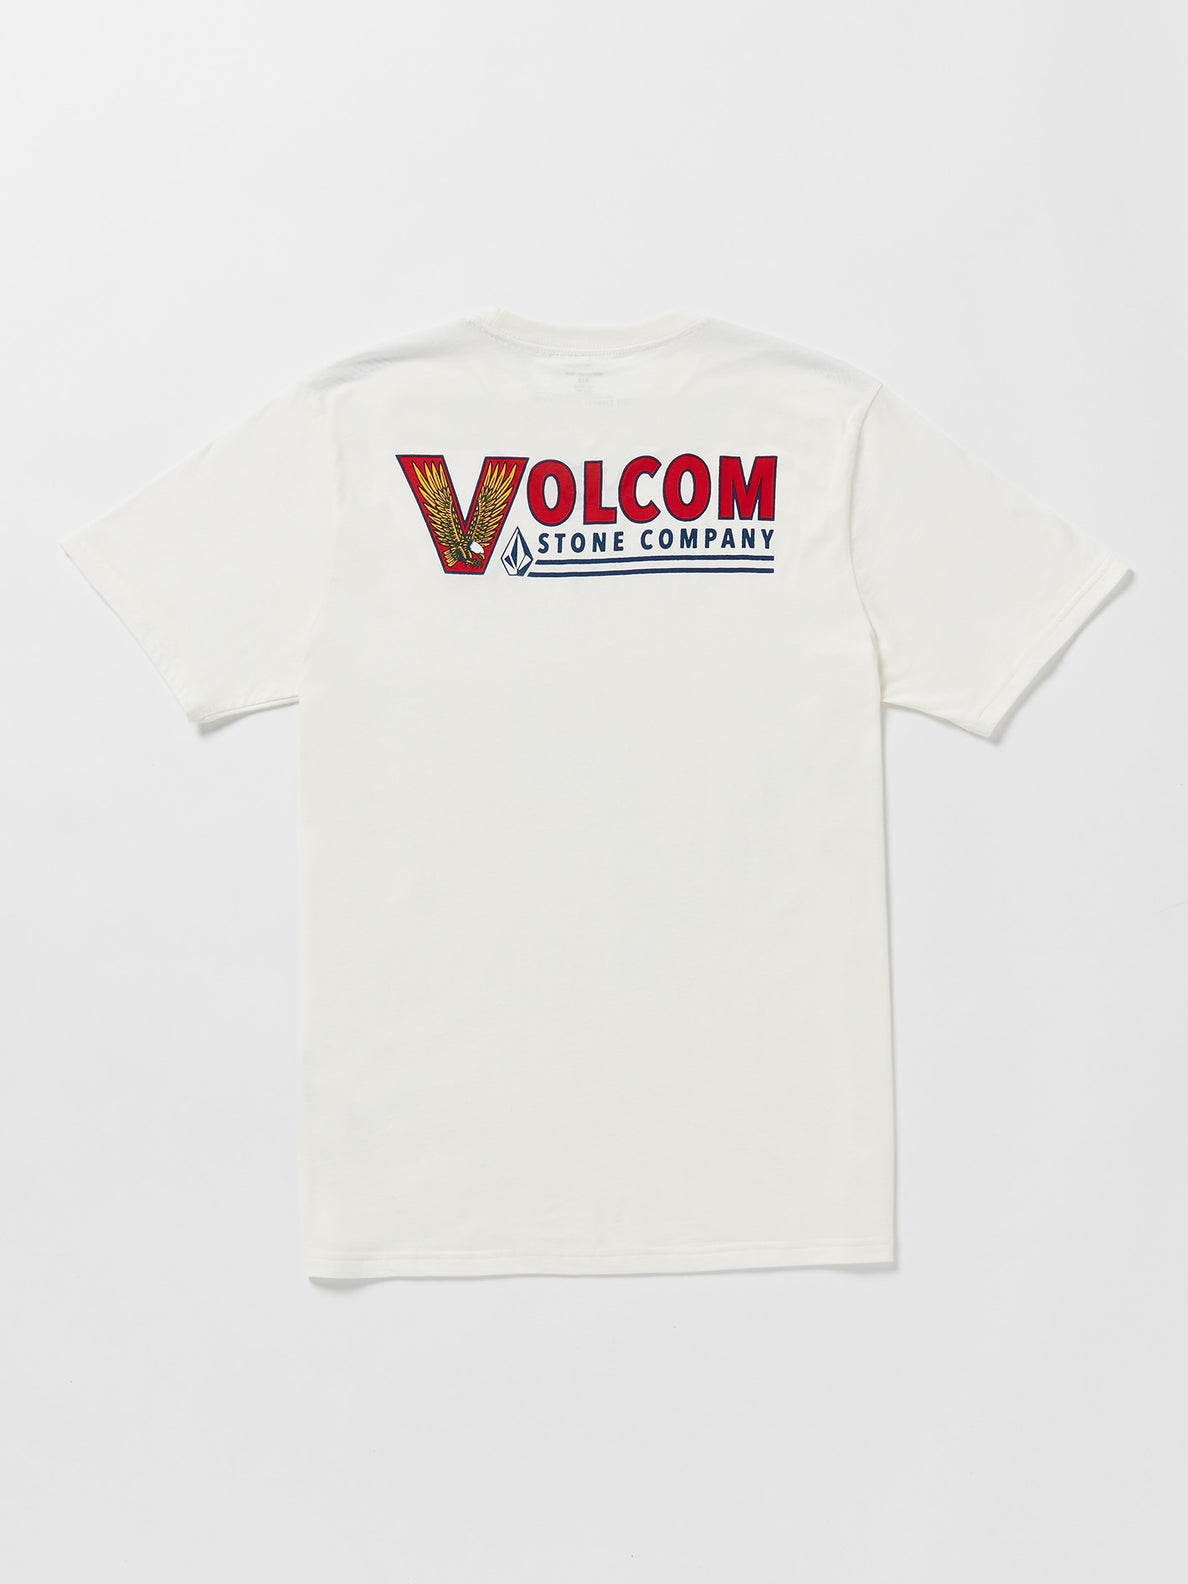 Veagle Short Sleeve Tee - Off White